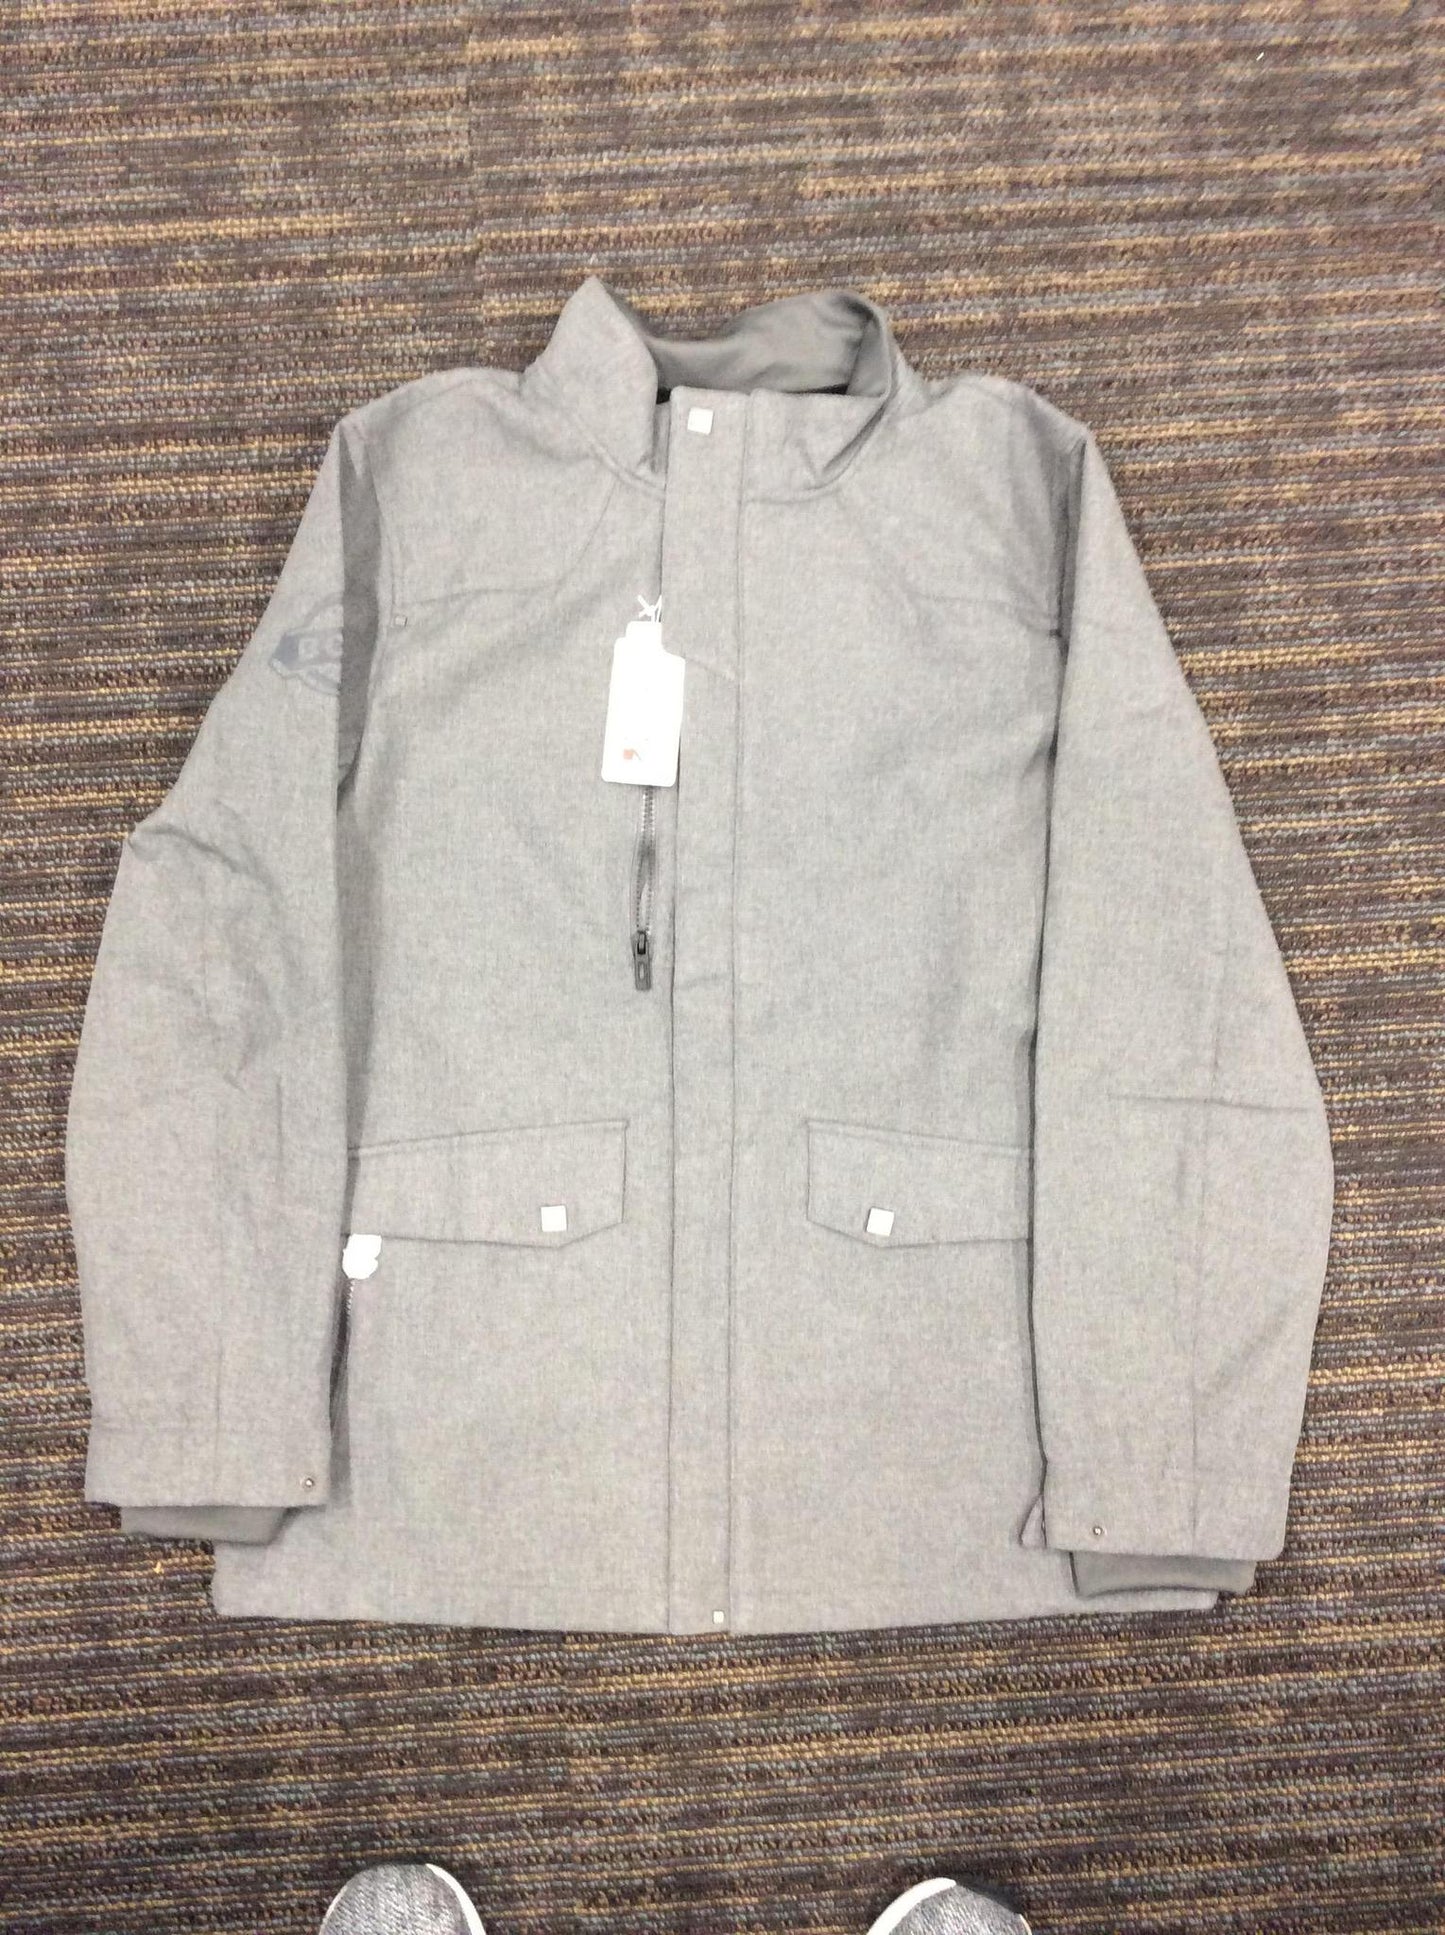 Player's Line - Gray Jacket